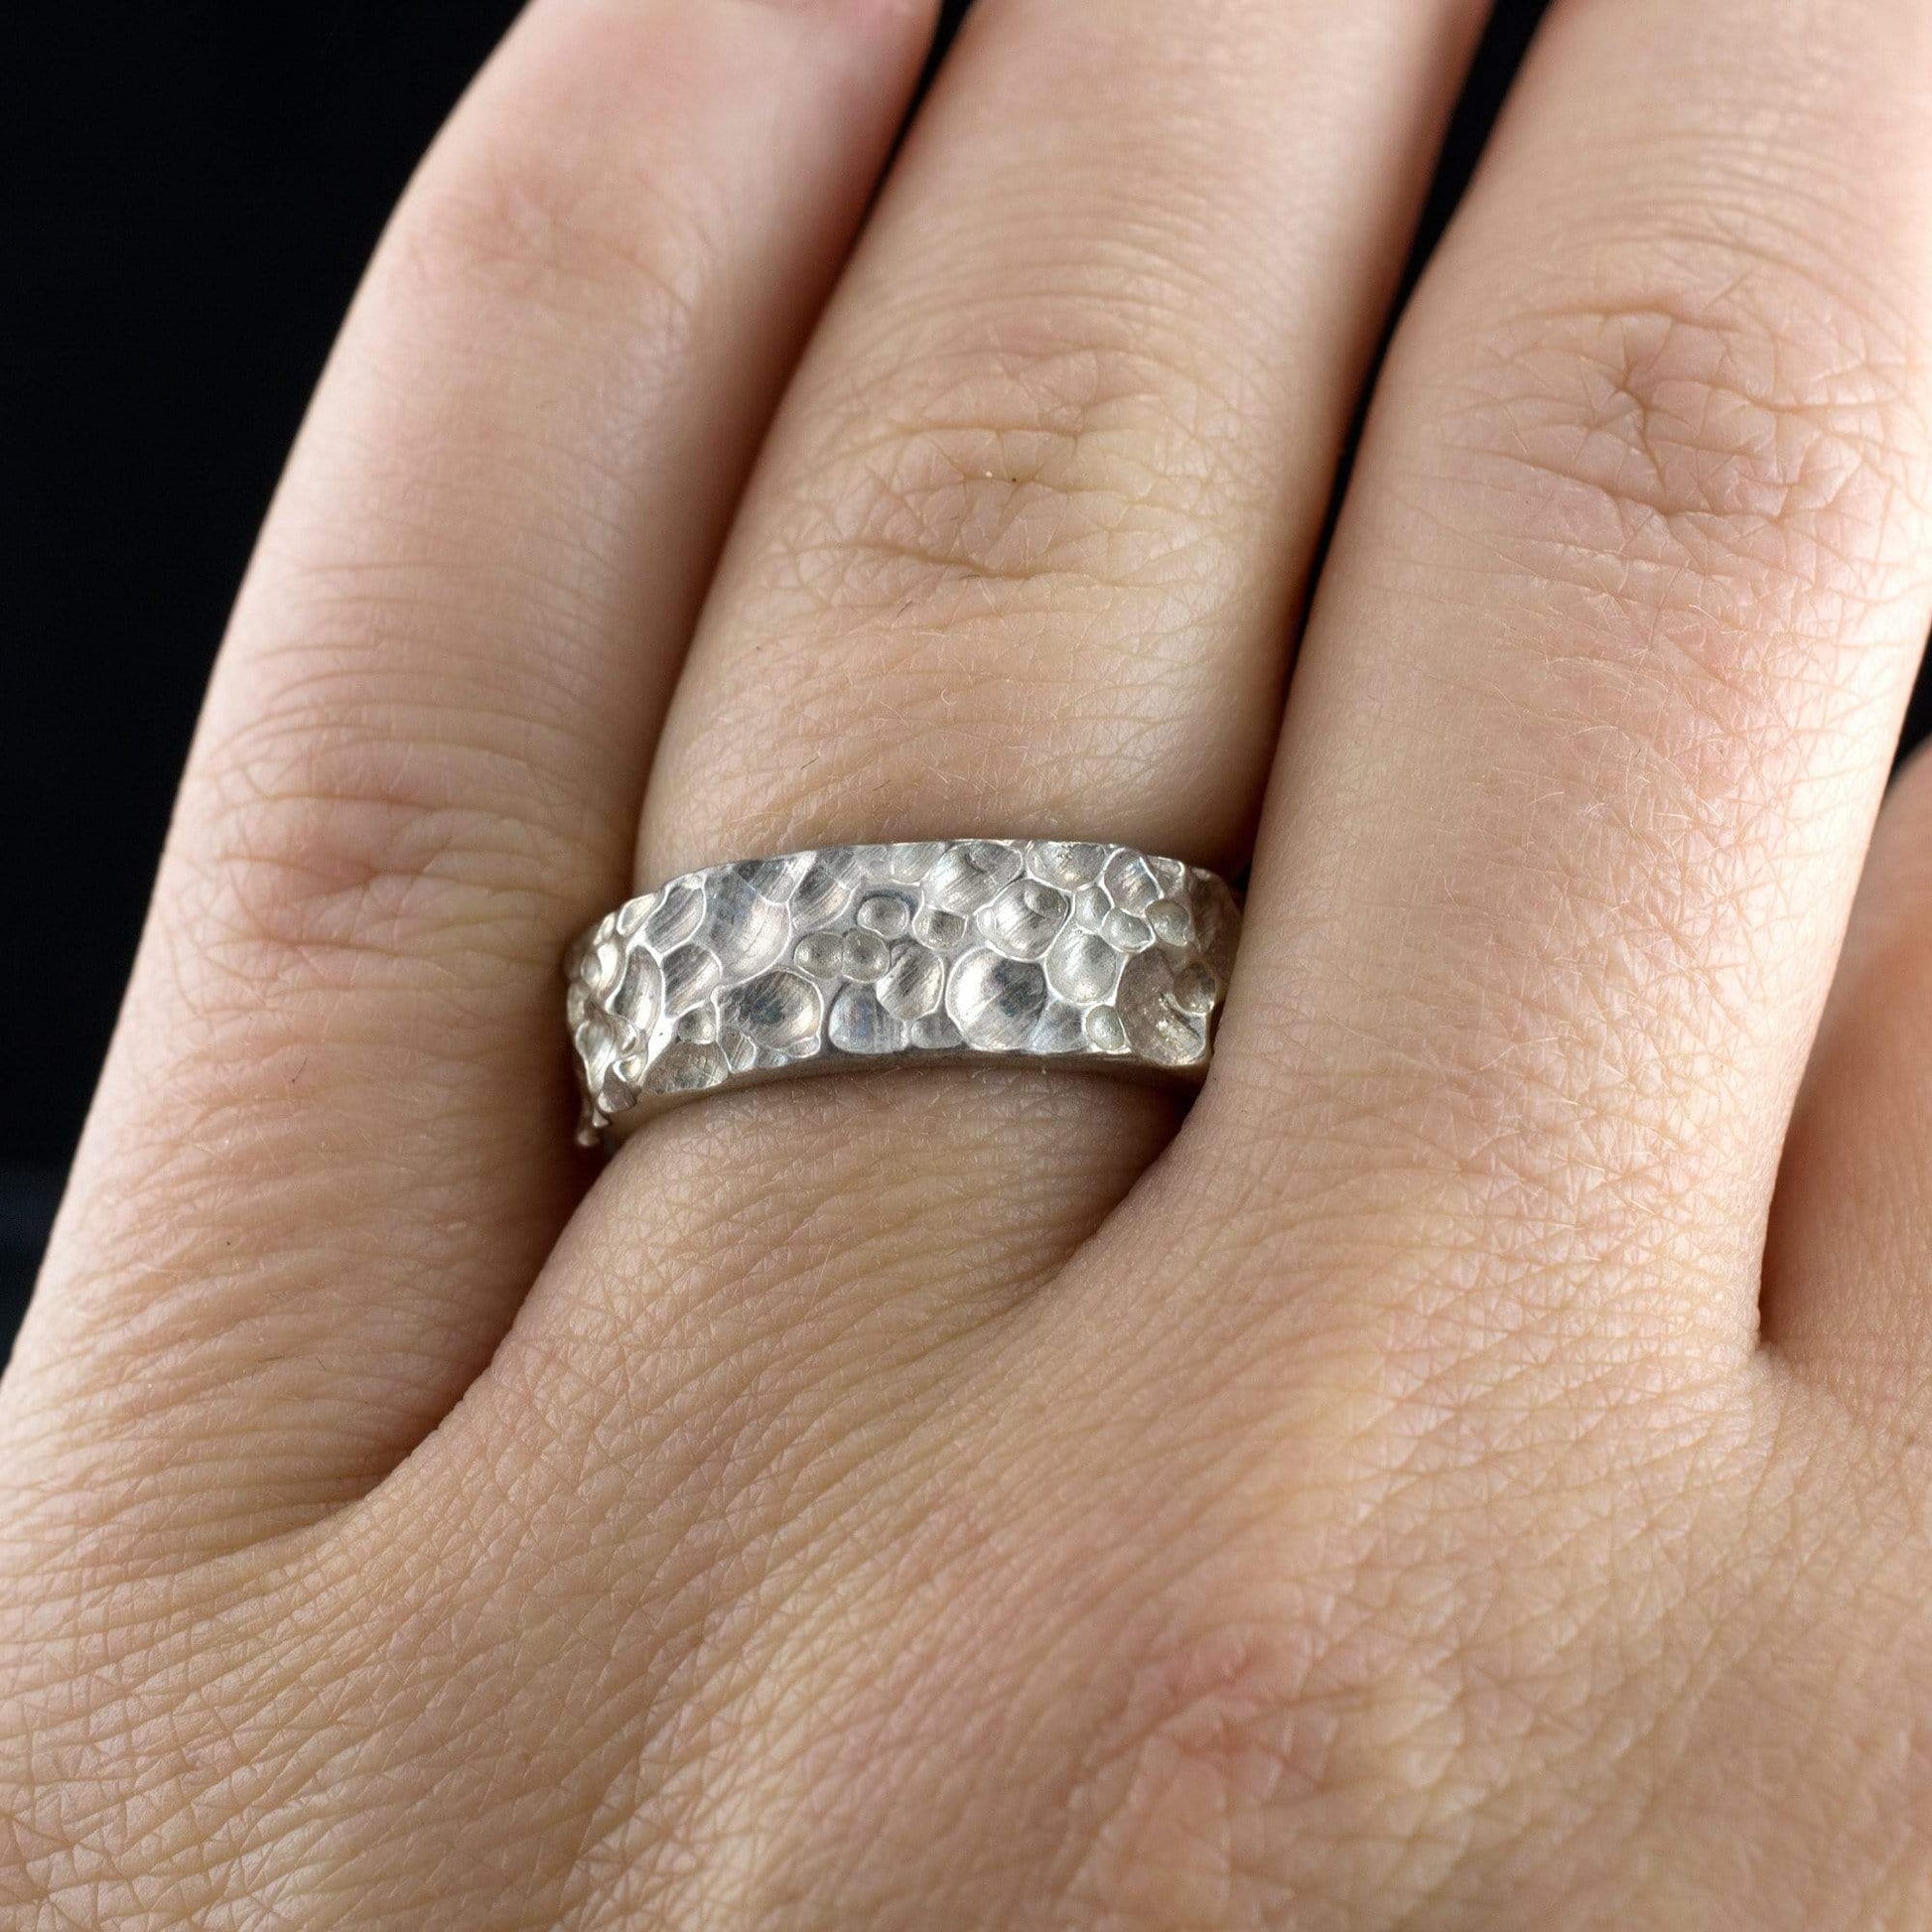 Crater Texture Wedding Ring Rustic Wedding Band Ring by Nodeform